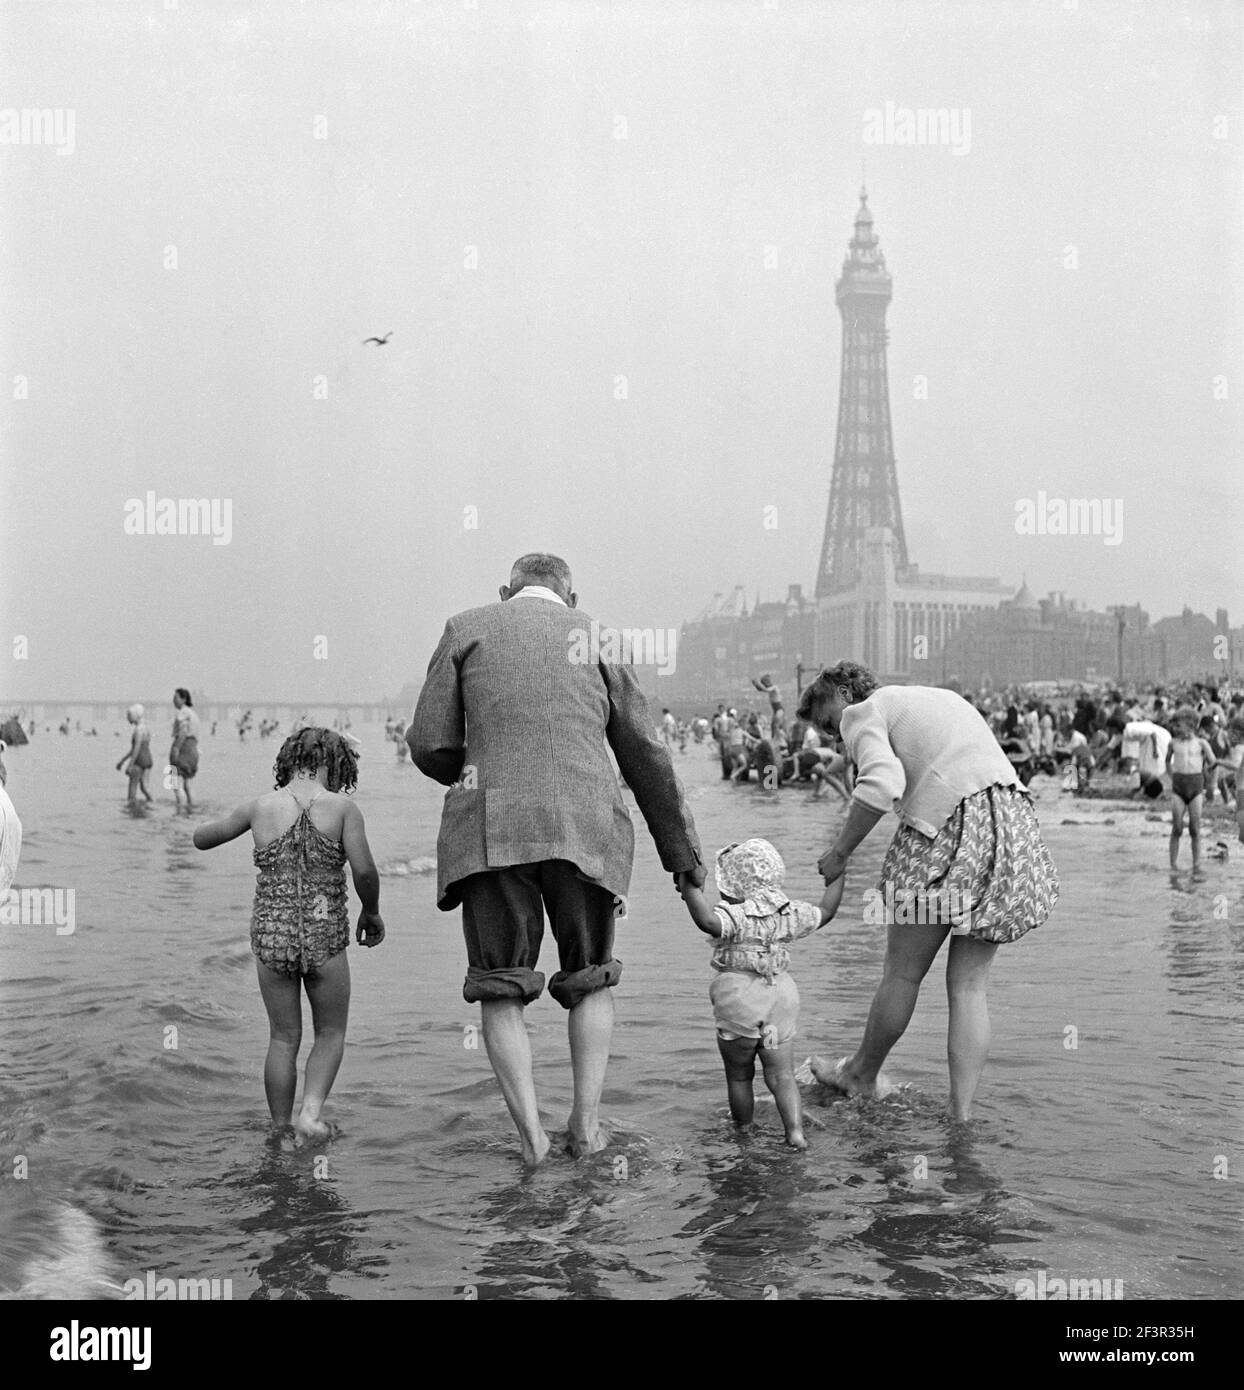 BLACKPOOL, Lancashire. Informal portrait showing rear view of a family with two small daughters paddling in the sea, with Blackpool Tower in the backg Stock Photo